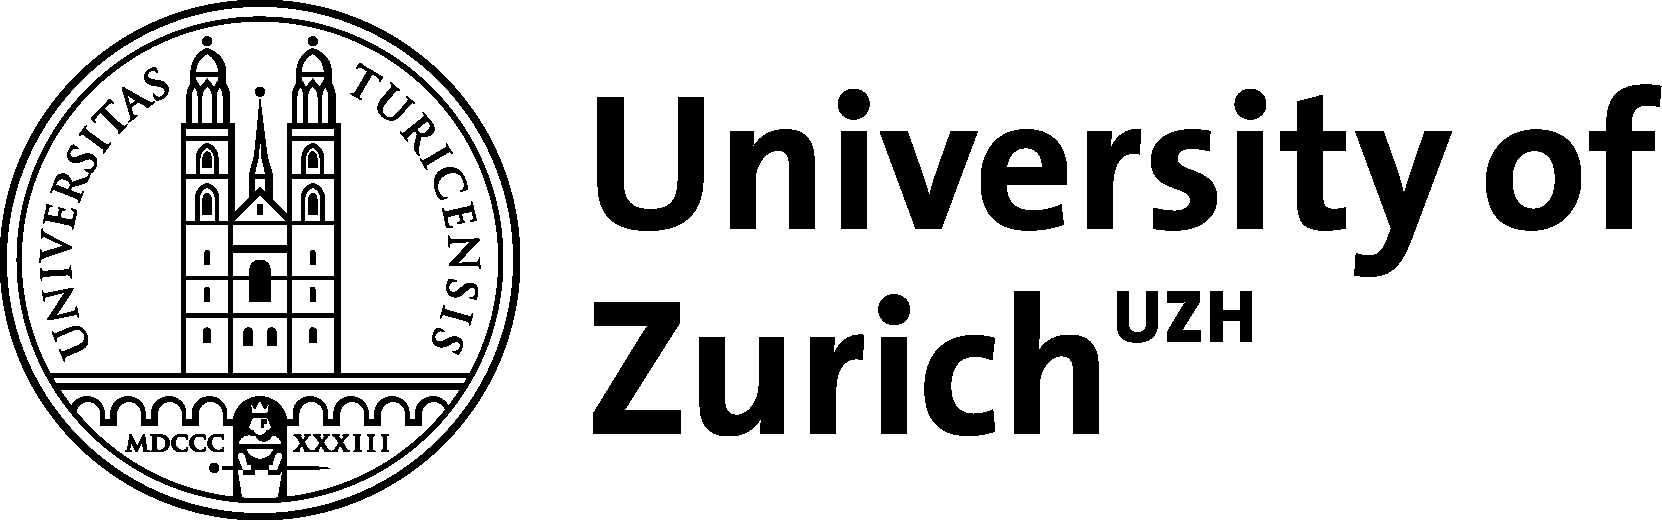 University of Zurich Fully-funded PhD Scholarships 2023/2024 for International Students